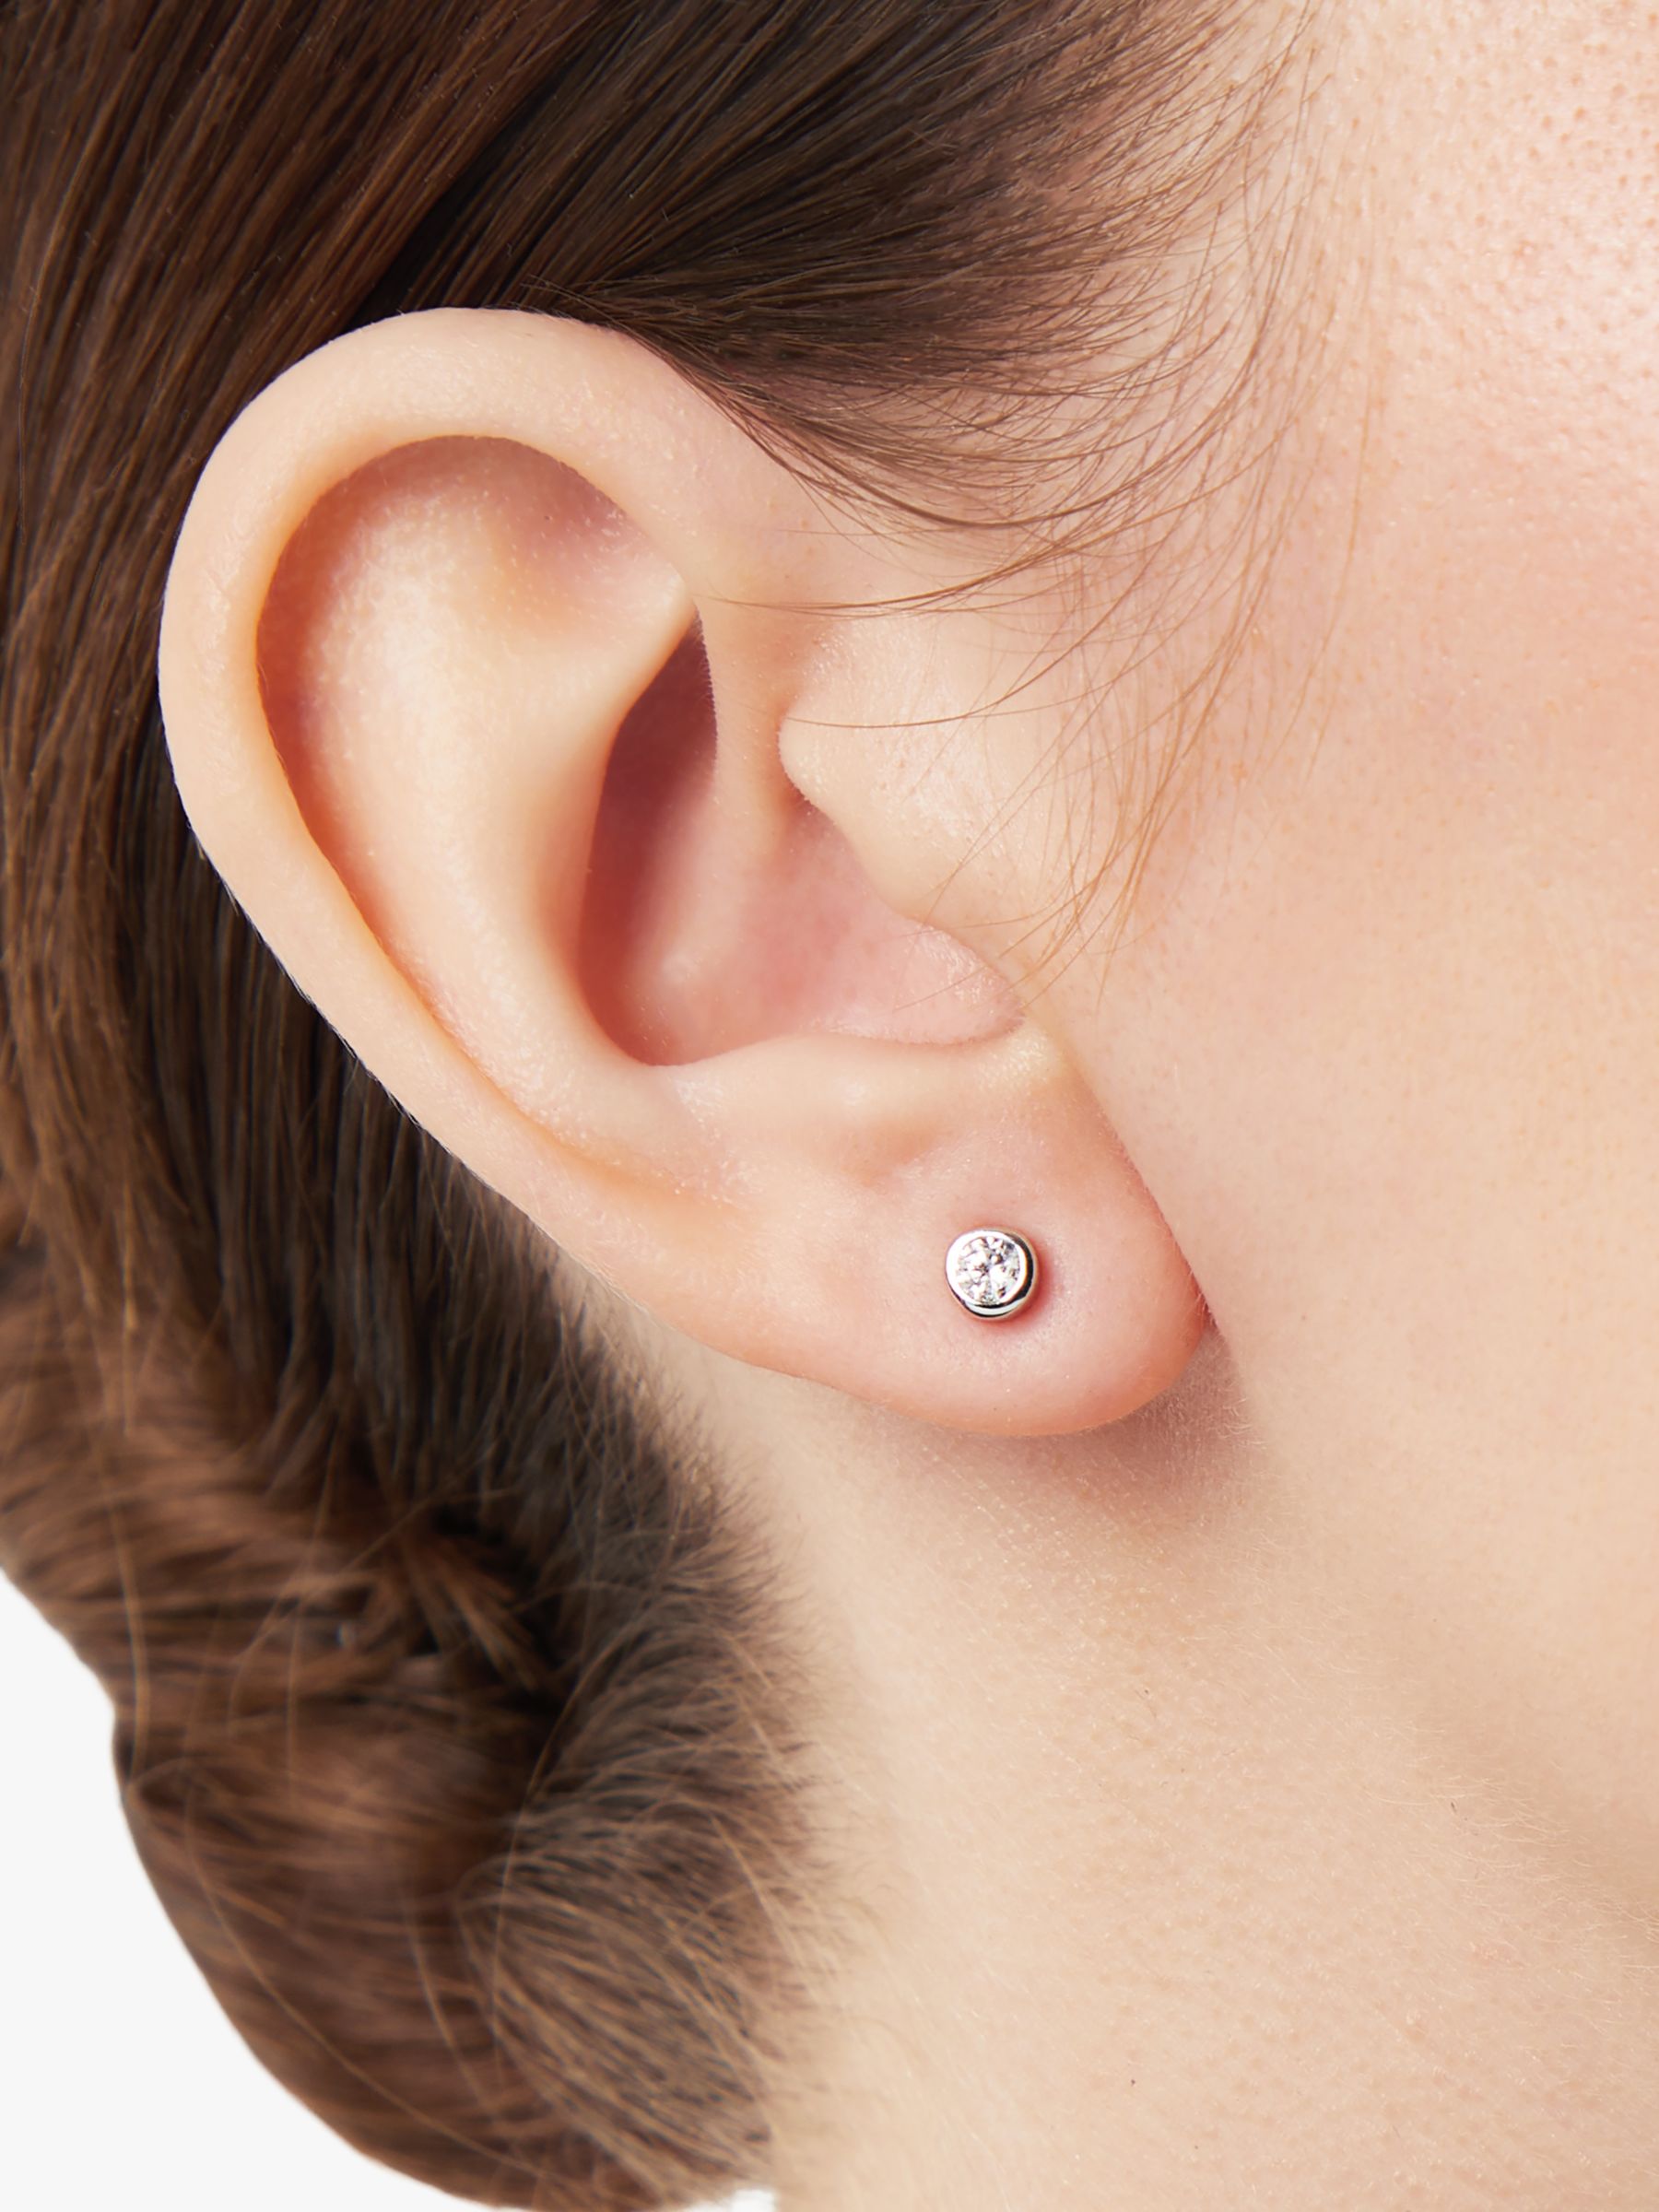 Buy Jools by Jenny Brown 4.5mm Round Stud Earrings Online at johnlewis.com